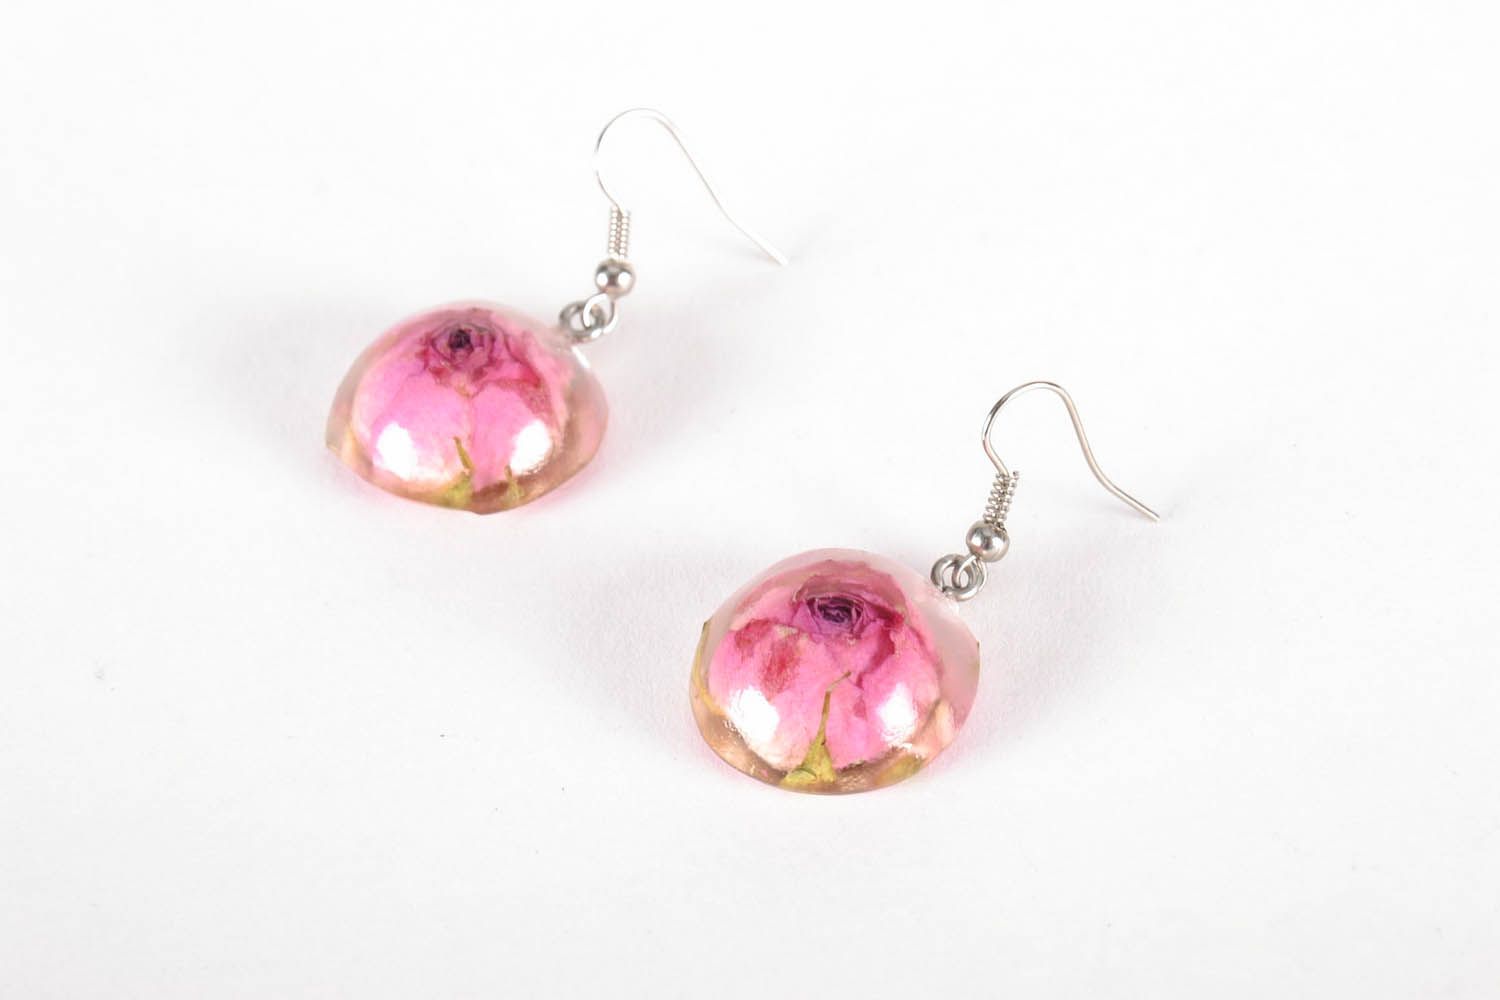 Earrings made of rose buds photo 1